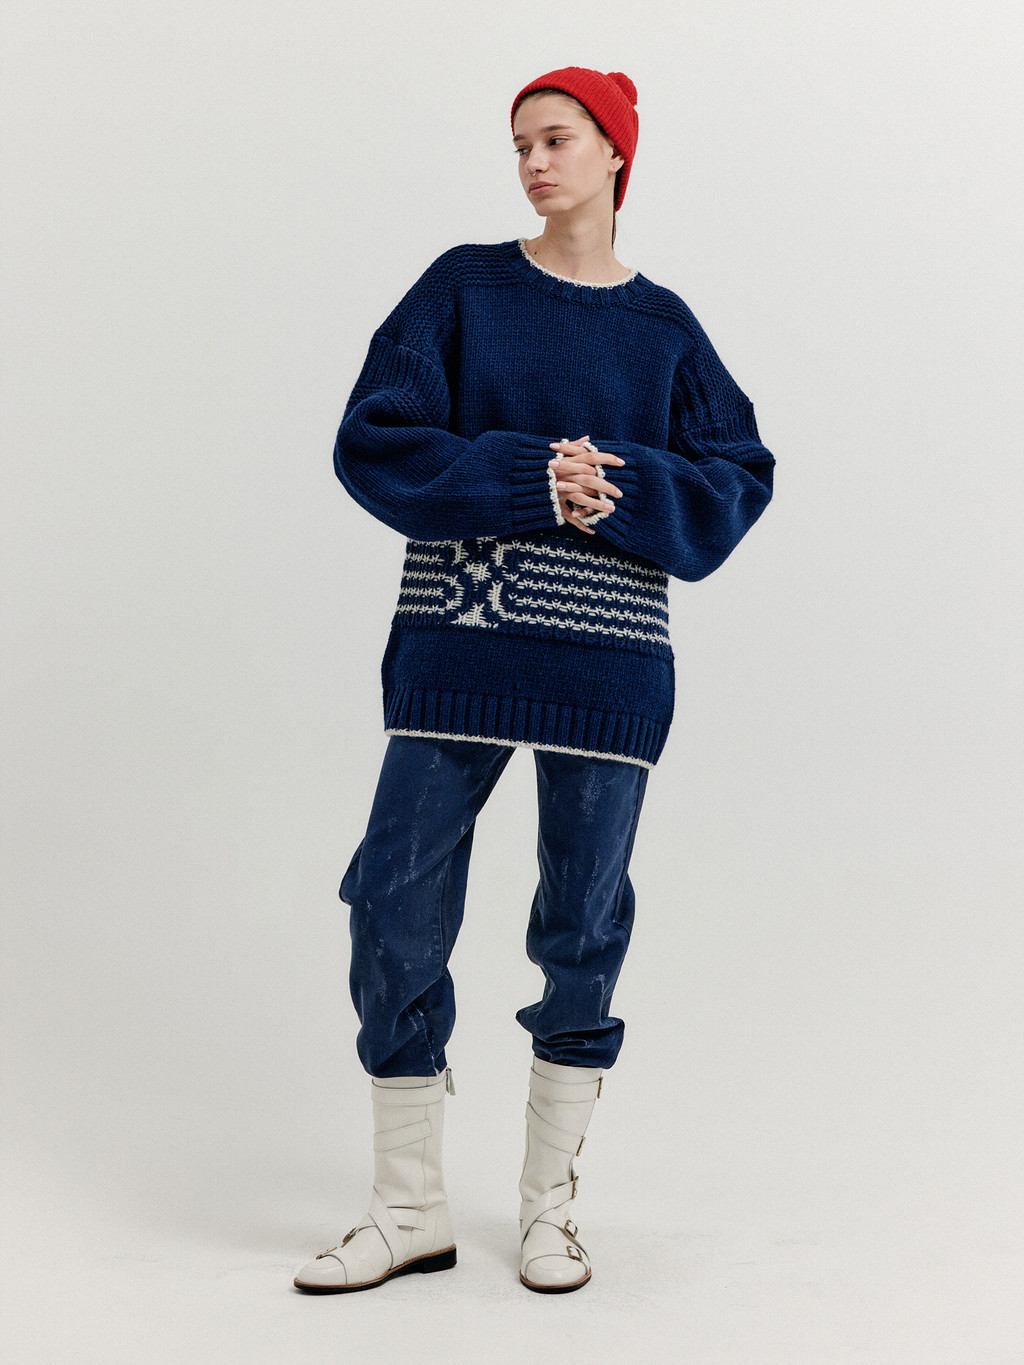 EENK Xanthe Jacquard Knit Pullover by W Concept